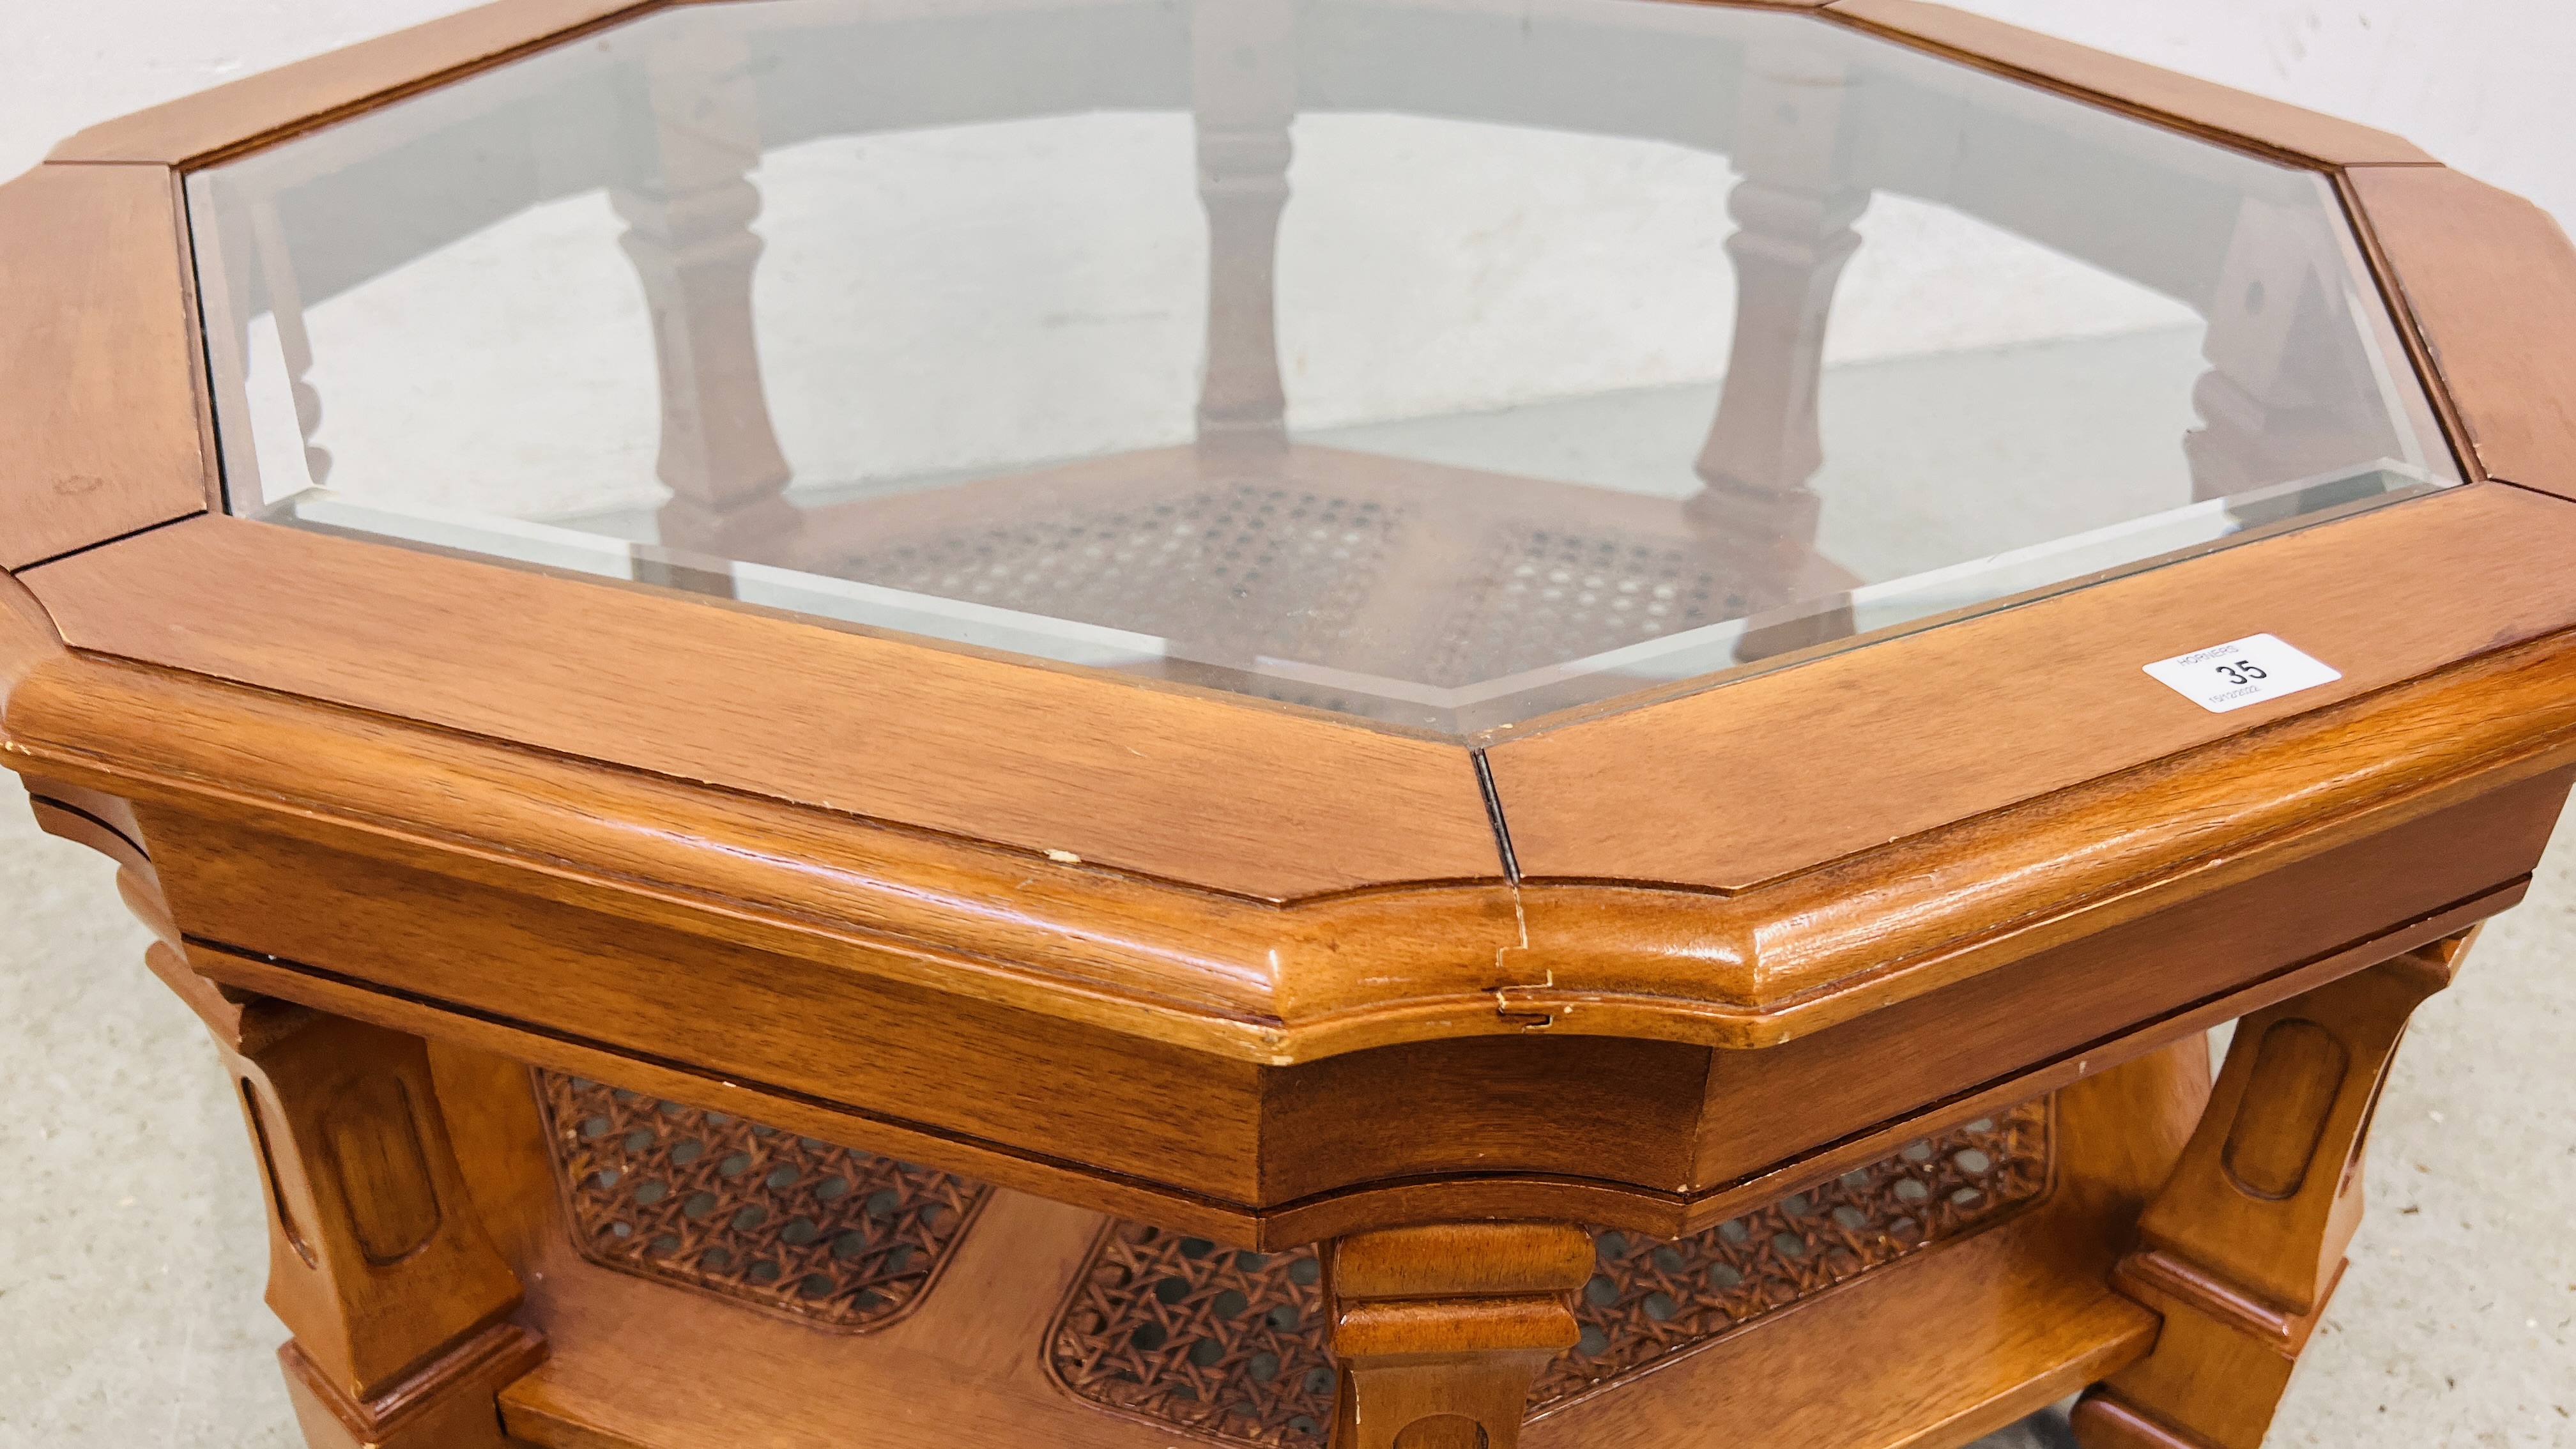 A GLASS TOP OCTAGONAL COFFEE TABLE WITH LOWER BERGERE WORK SHELF - Image 7 of 9